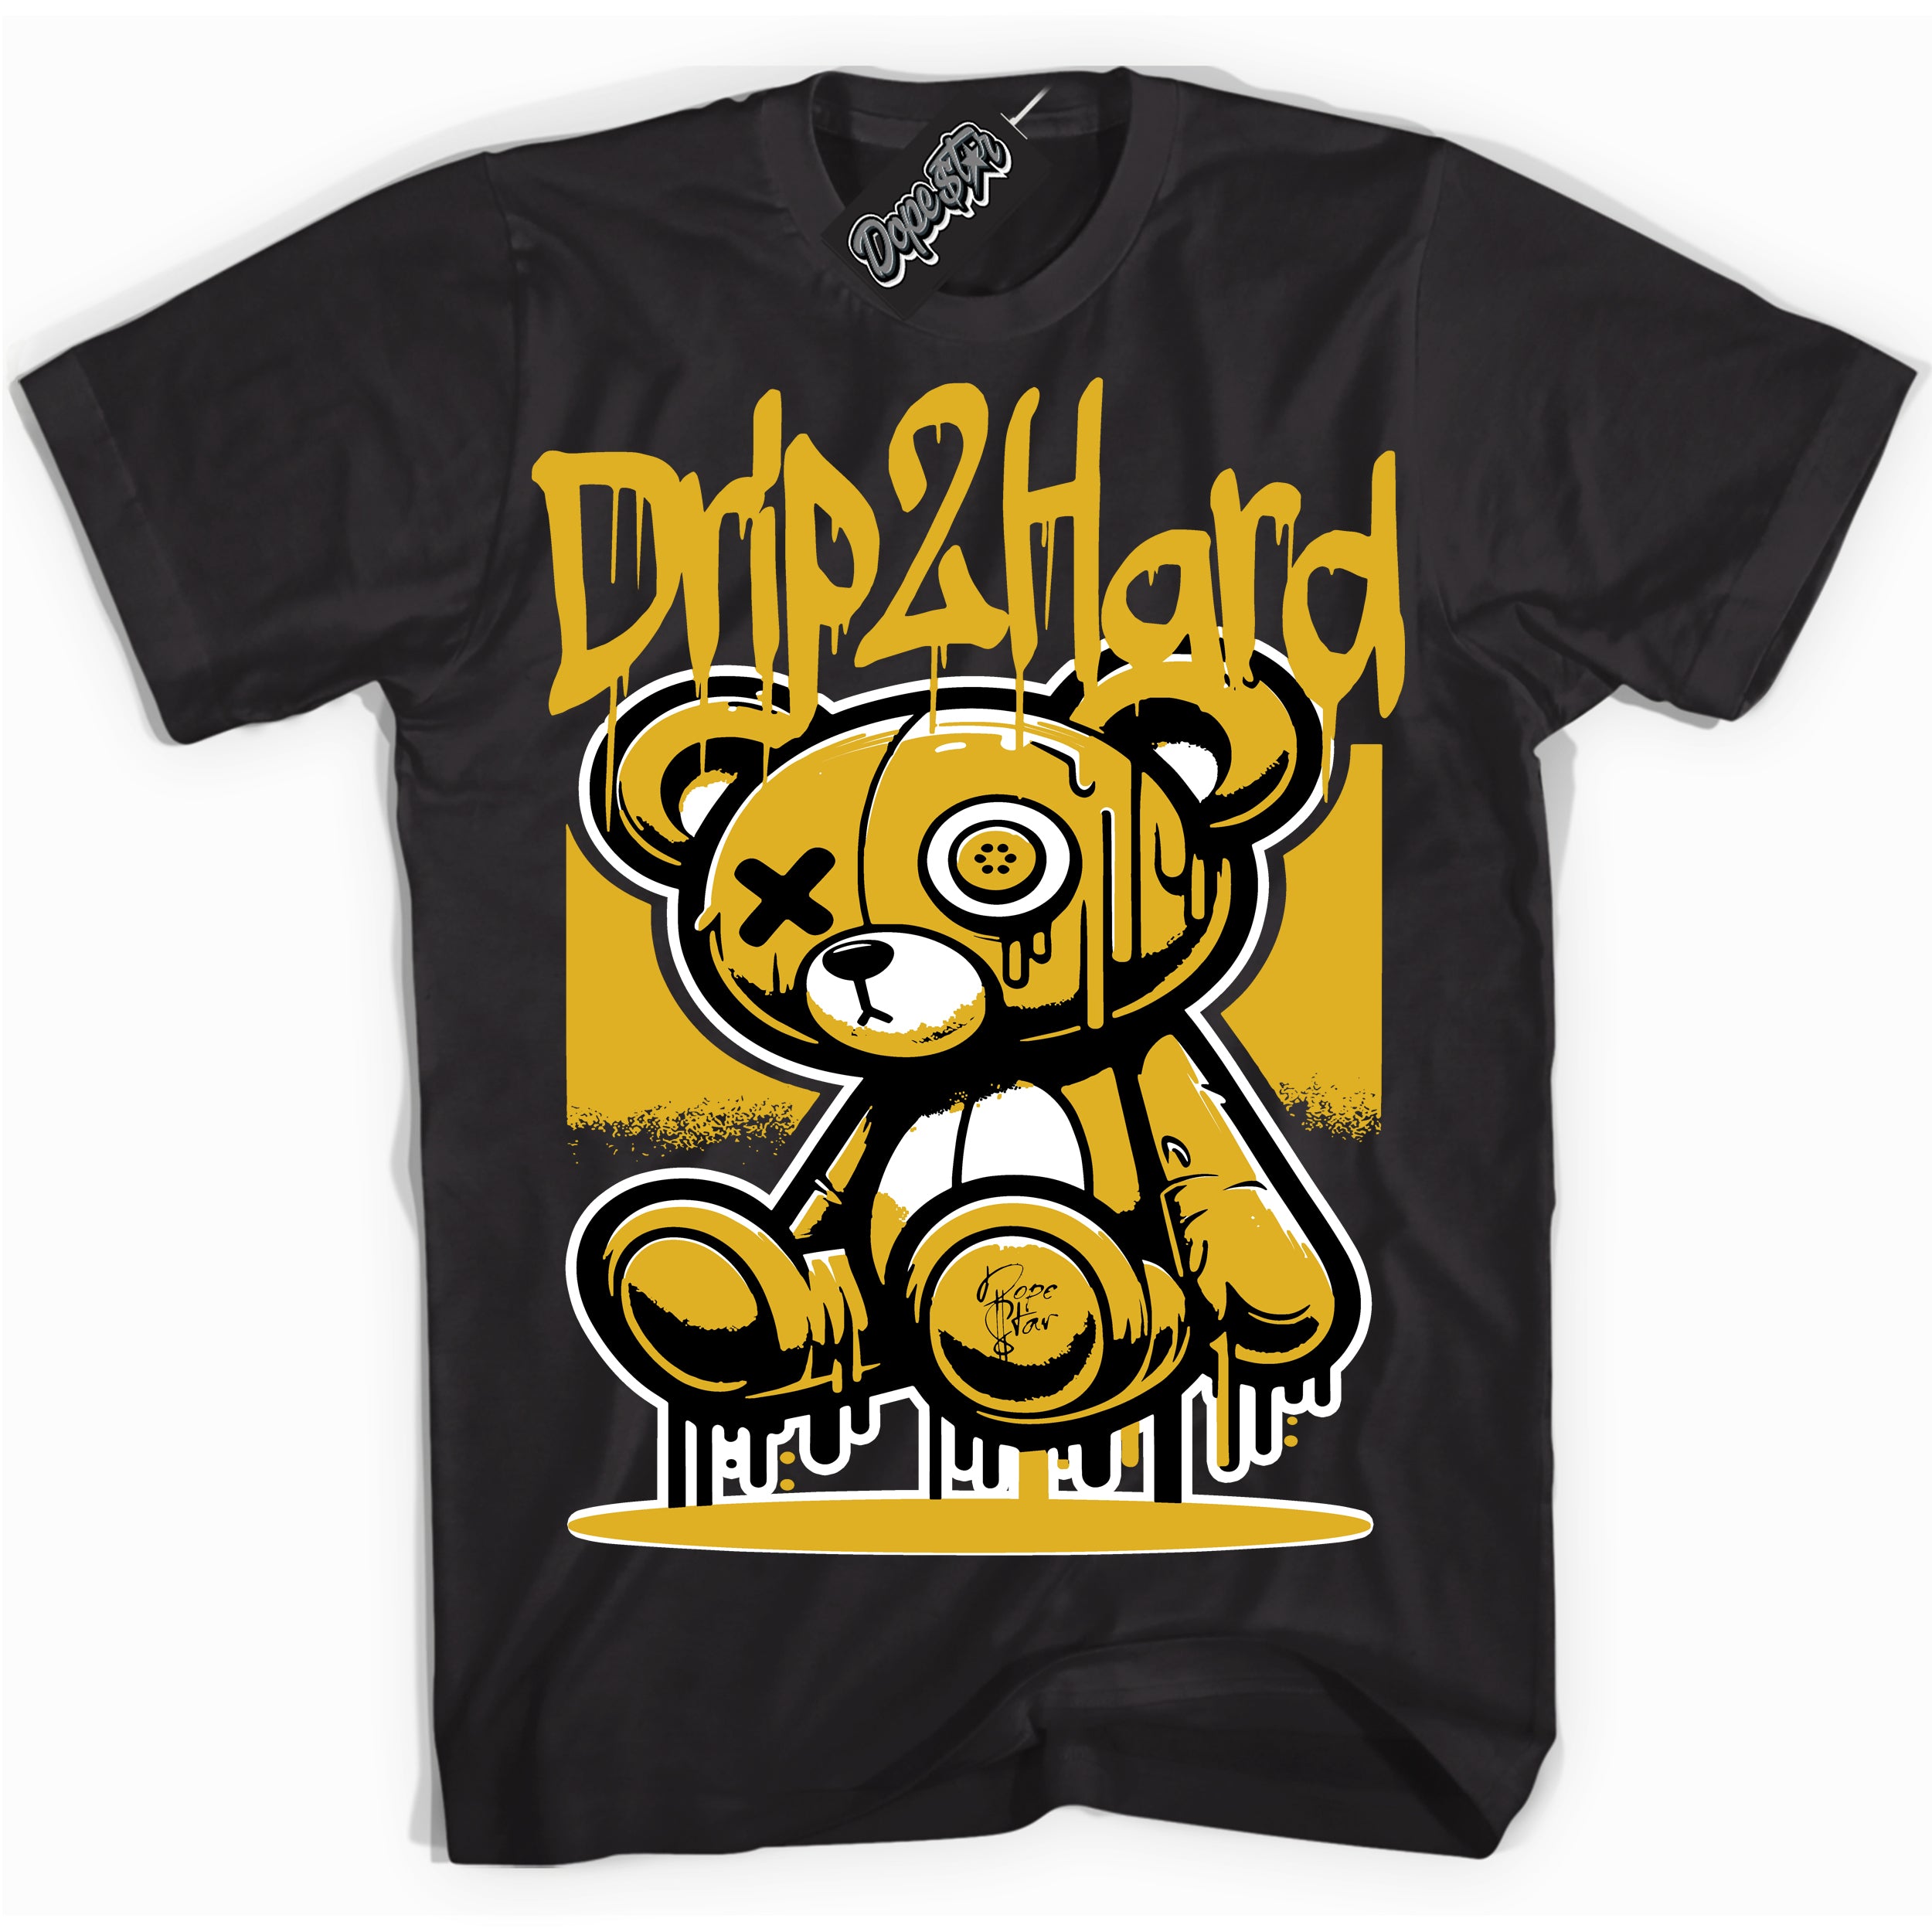 Cool Black Shirt With Drip 2 Hard  design That Perfectly Matches YELLOW OCHRE 6s Sneakers.